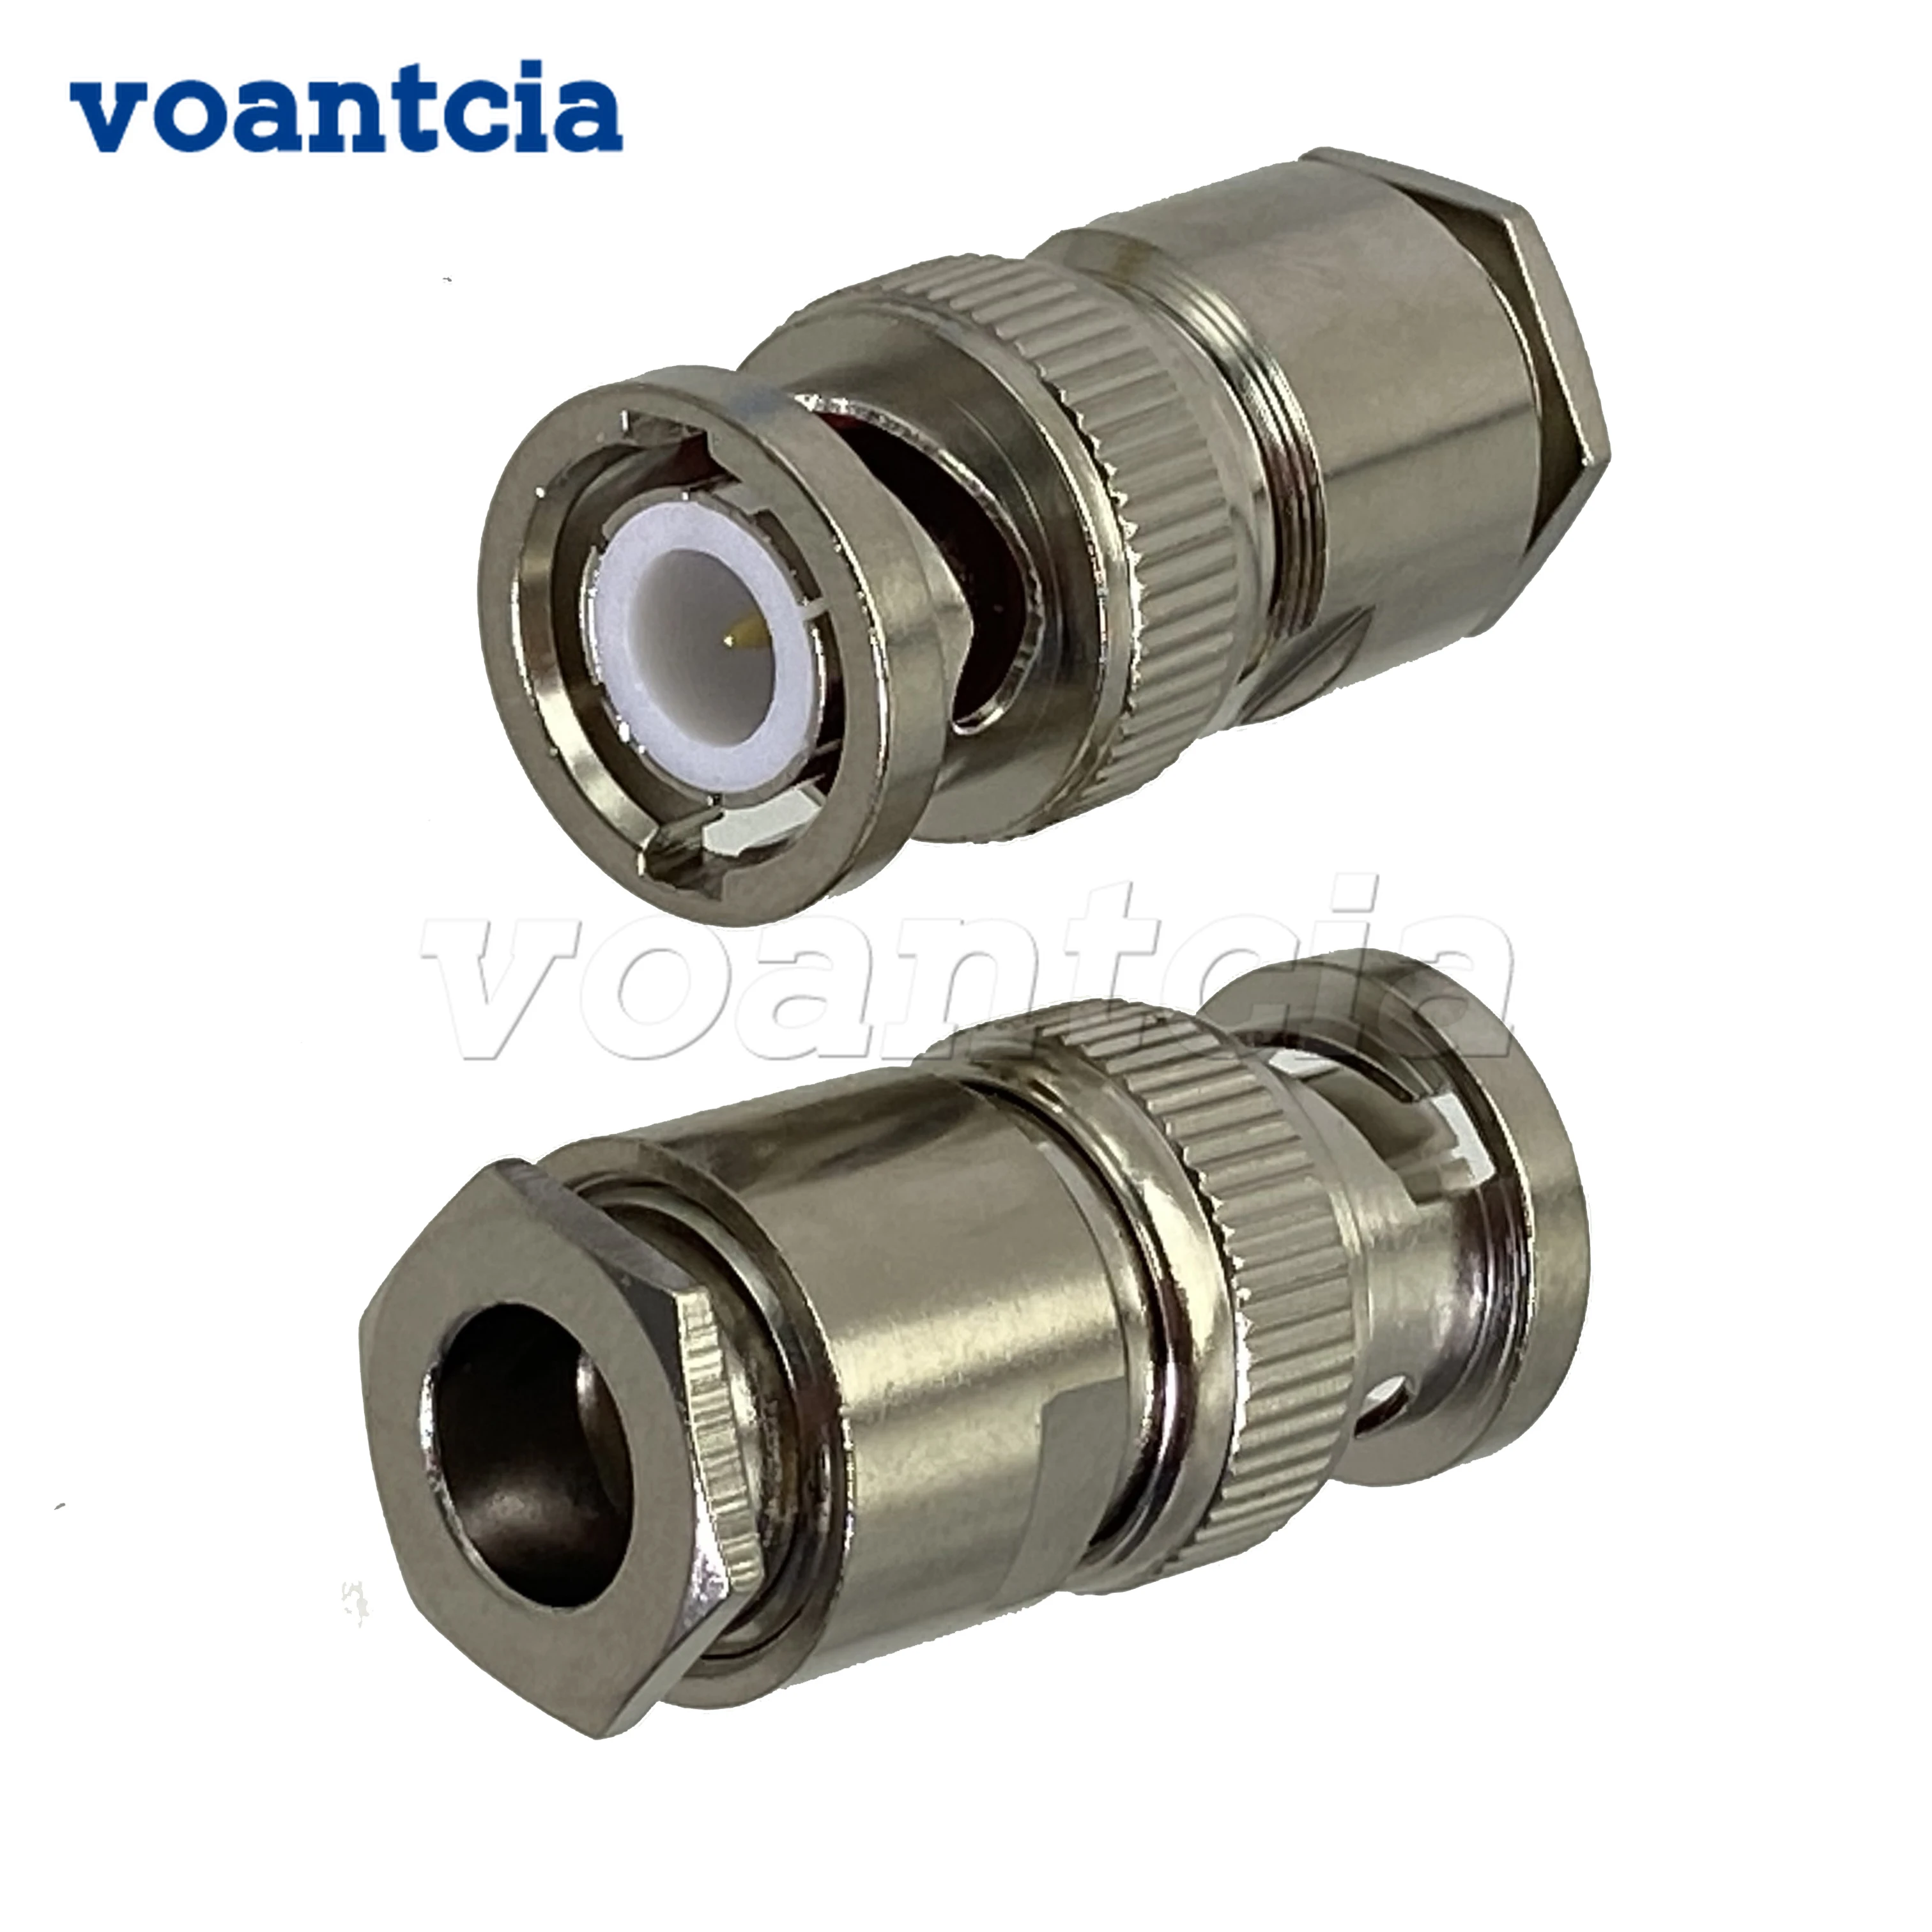 

10pcs Connector BNC Plug Male Clamp For RG5 RG6 LMR300 RG304 Cable Wire Terminals Straight RF Coaxial Adapter New